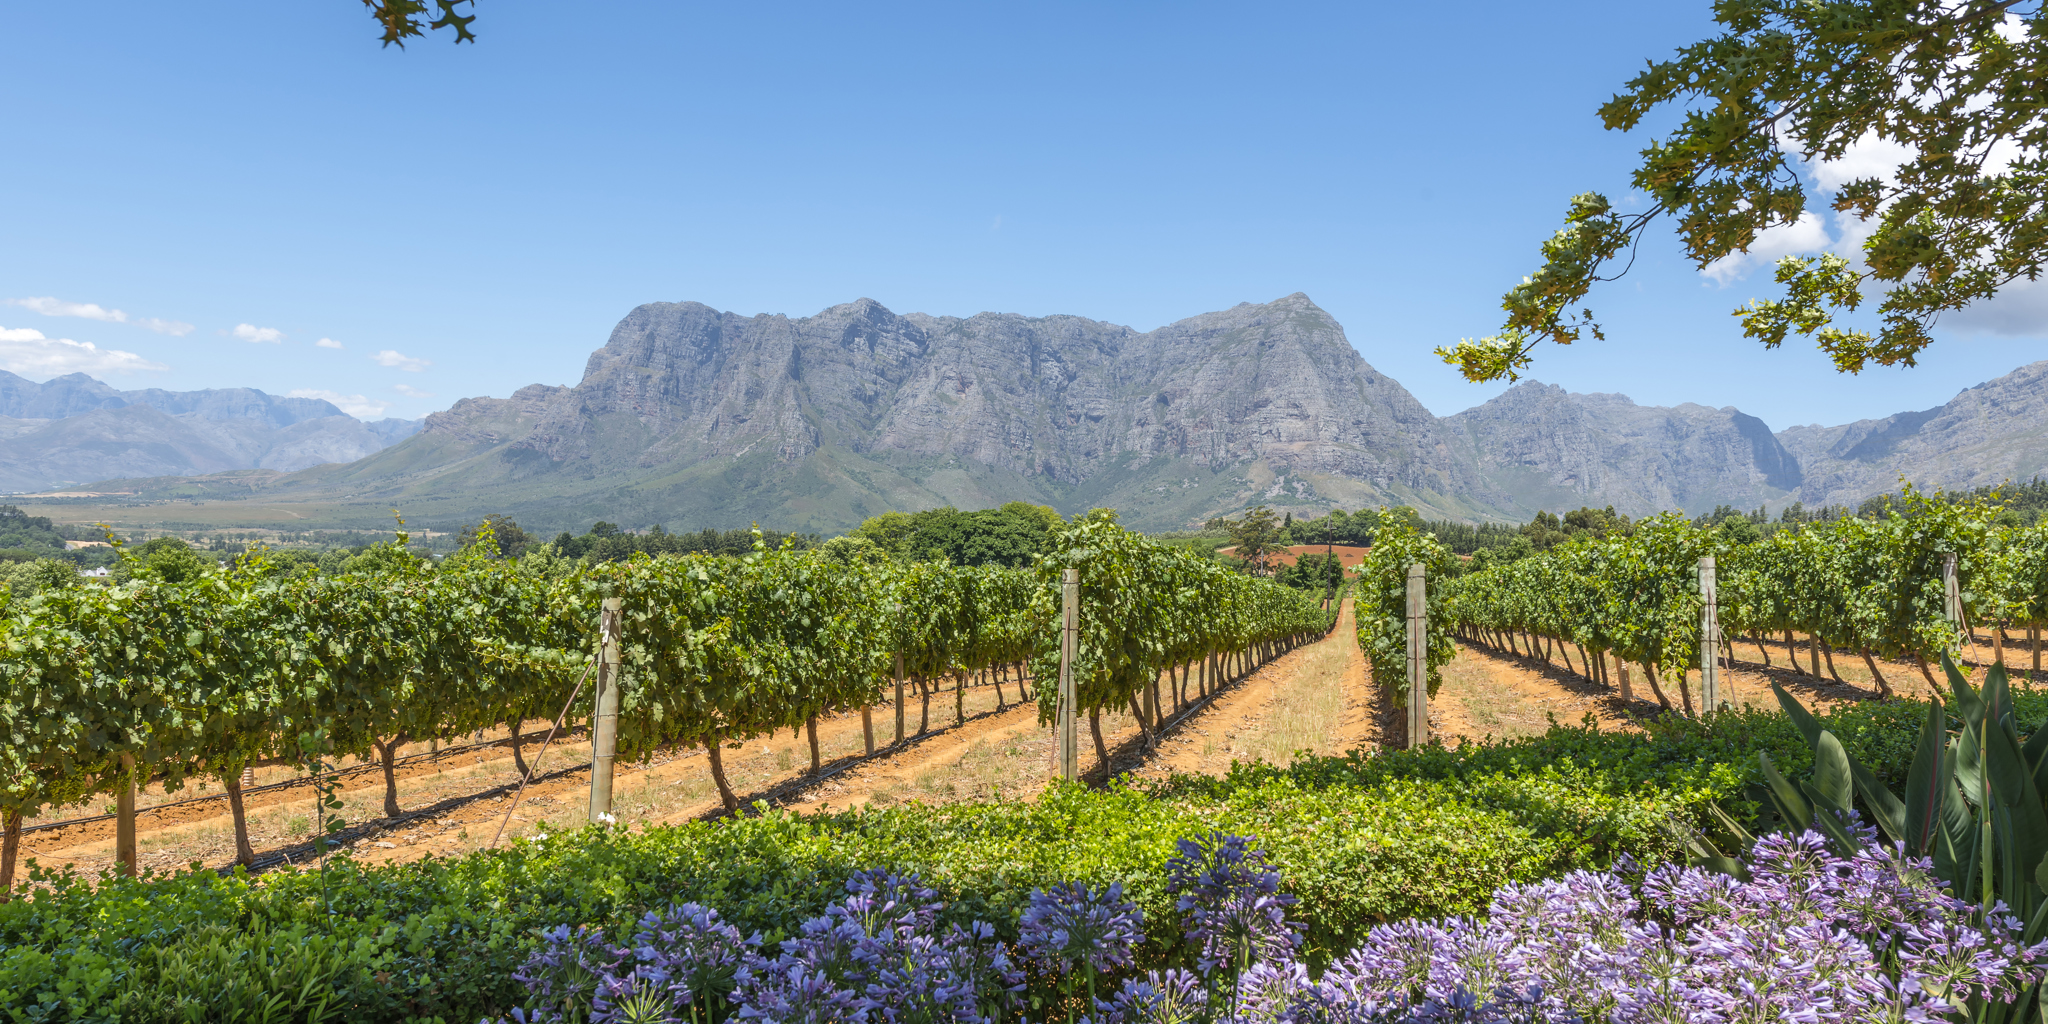 the winelands vineyards, south africa safari vacations